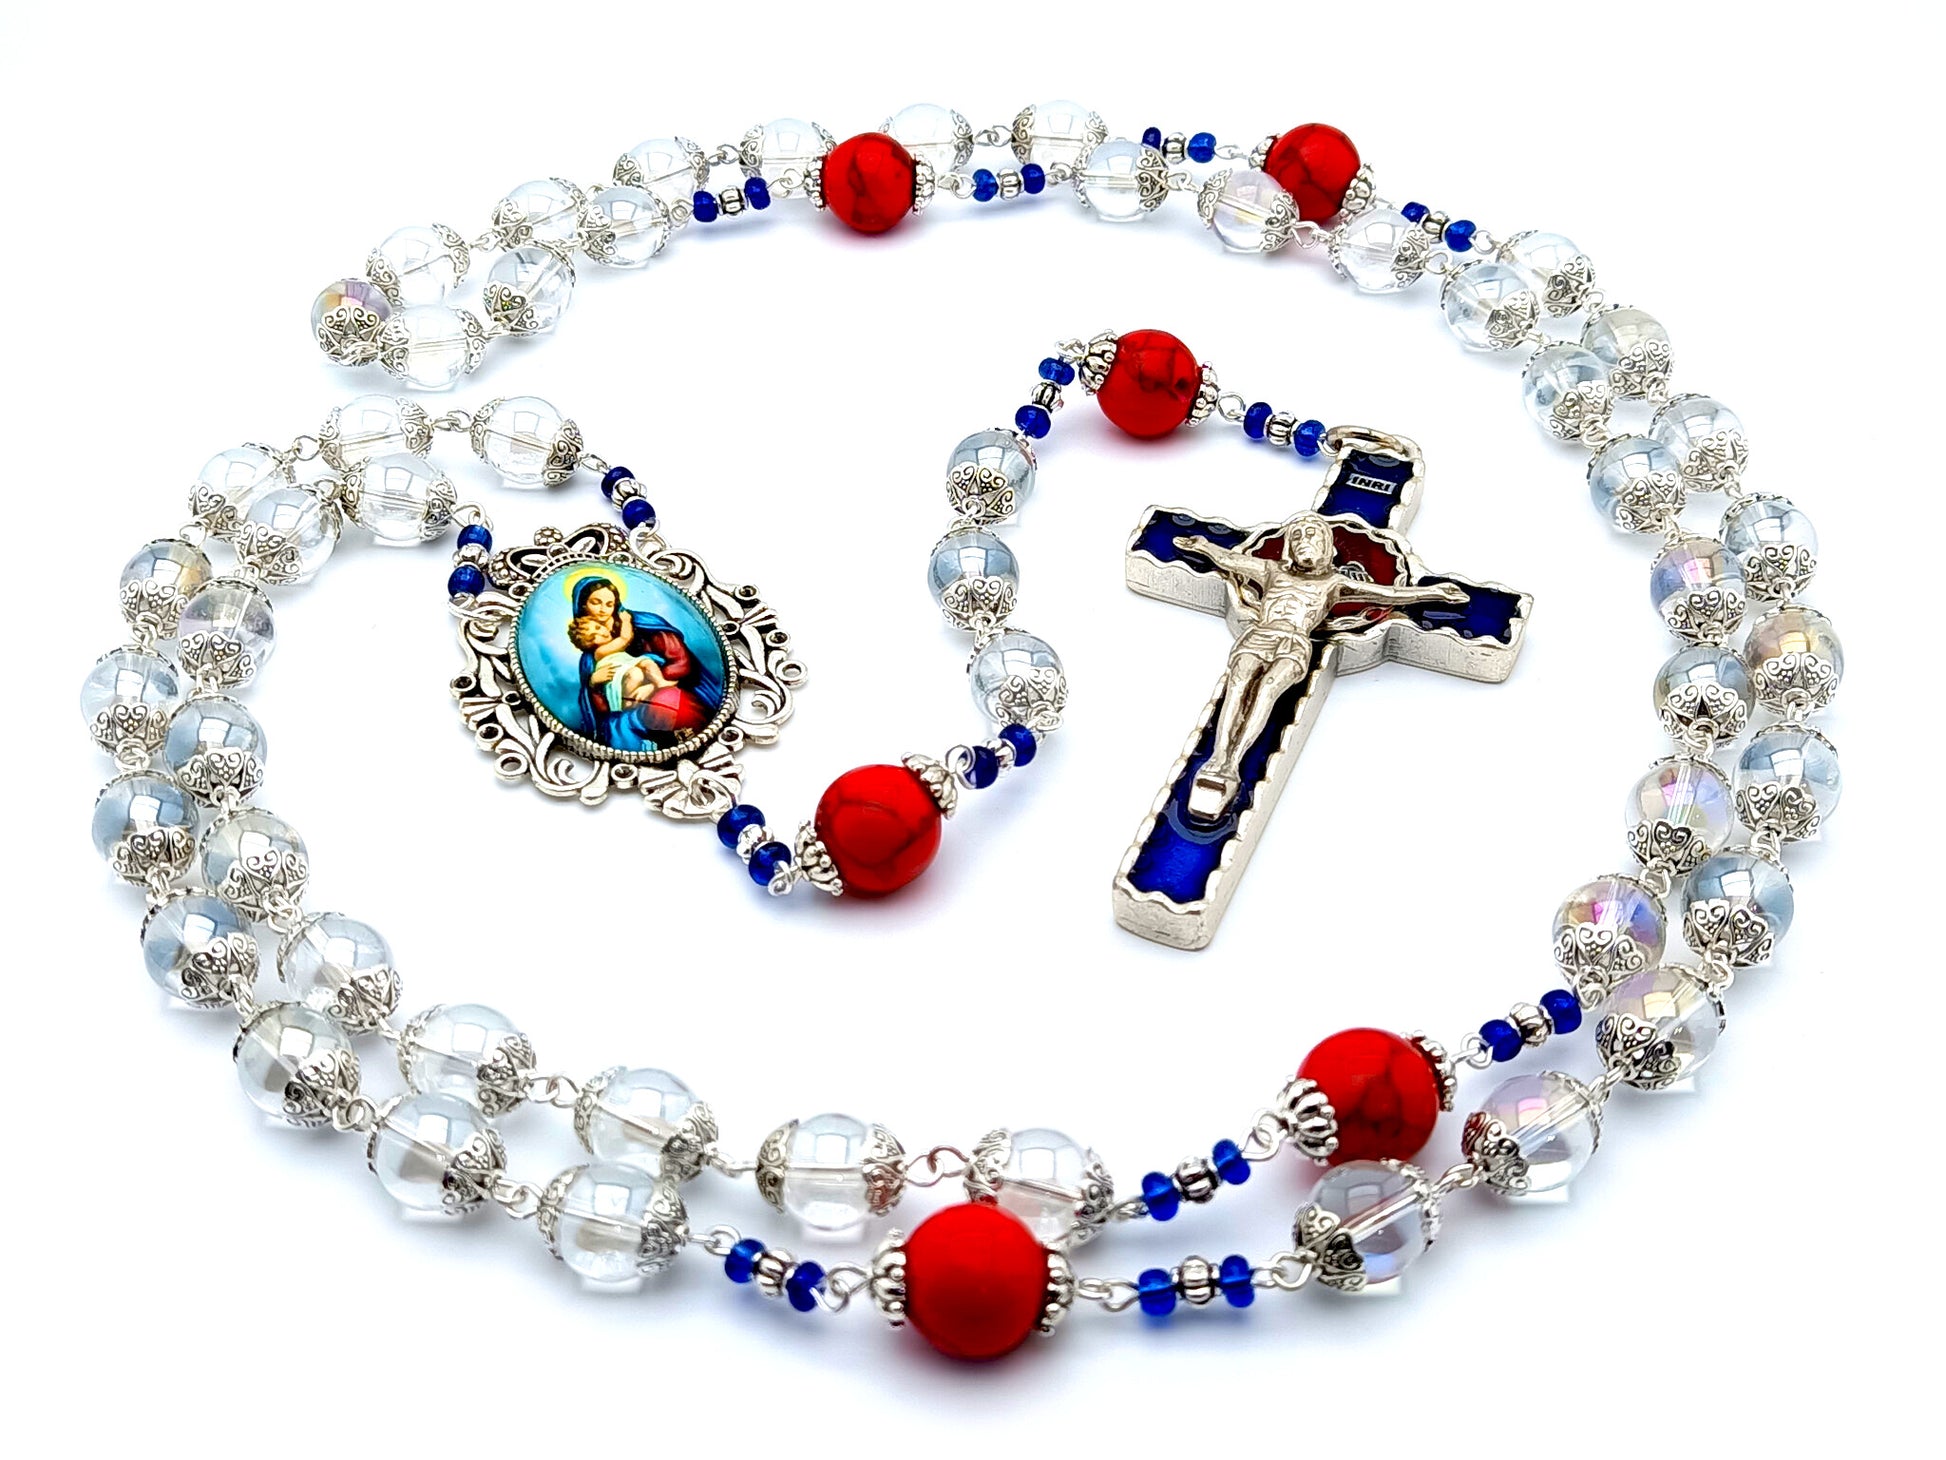 Virgin & Child unique rosary beads with clear glass beads, red gemstone pater beads and blue enamel crucifix.